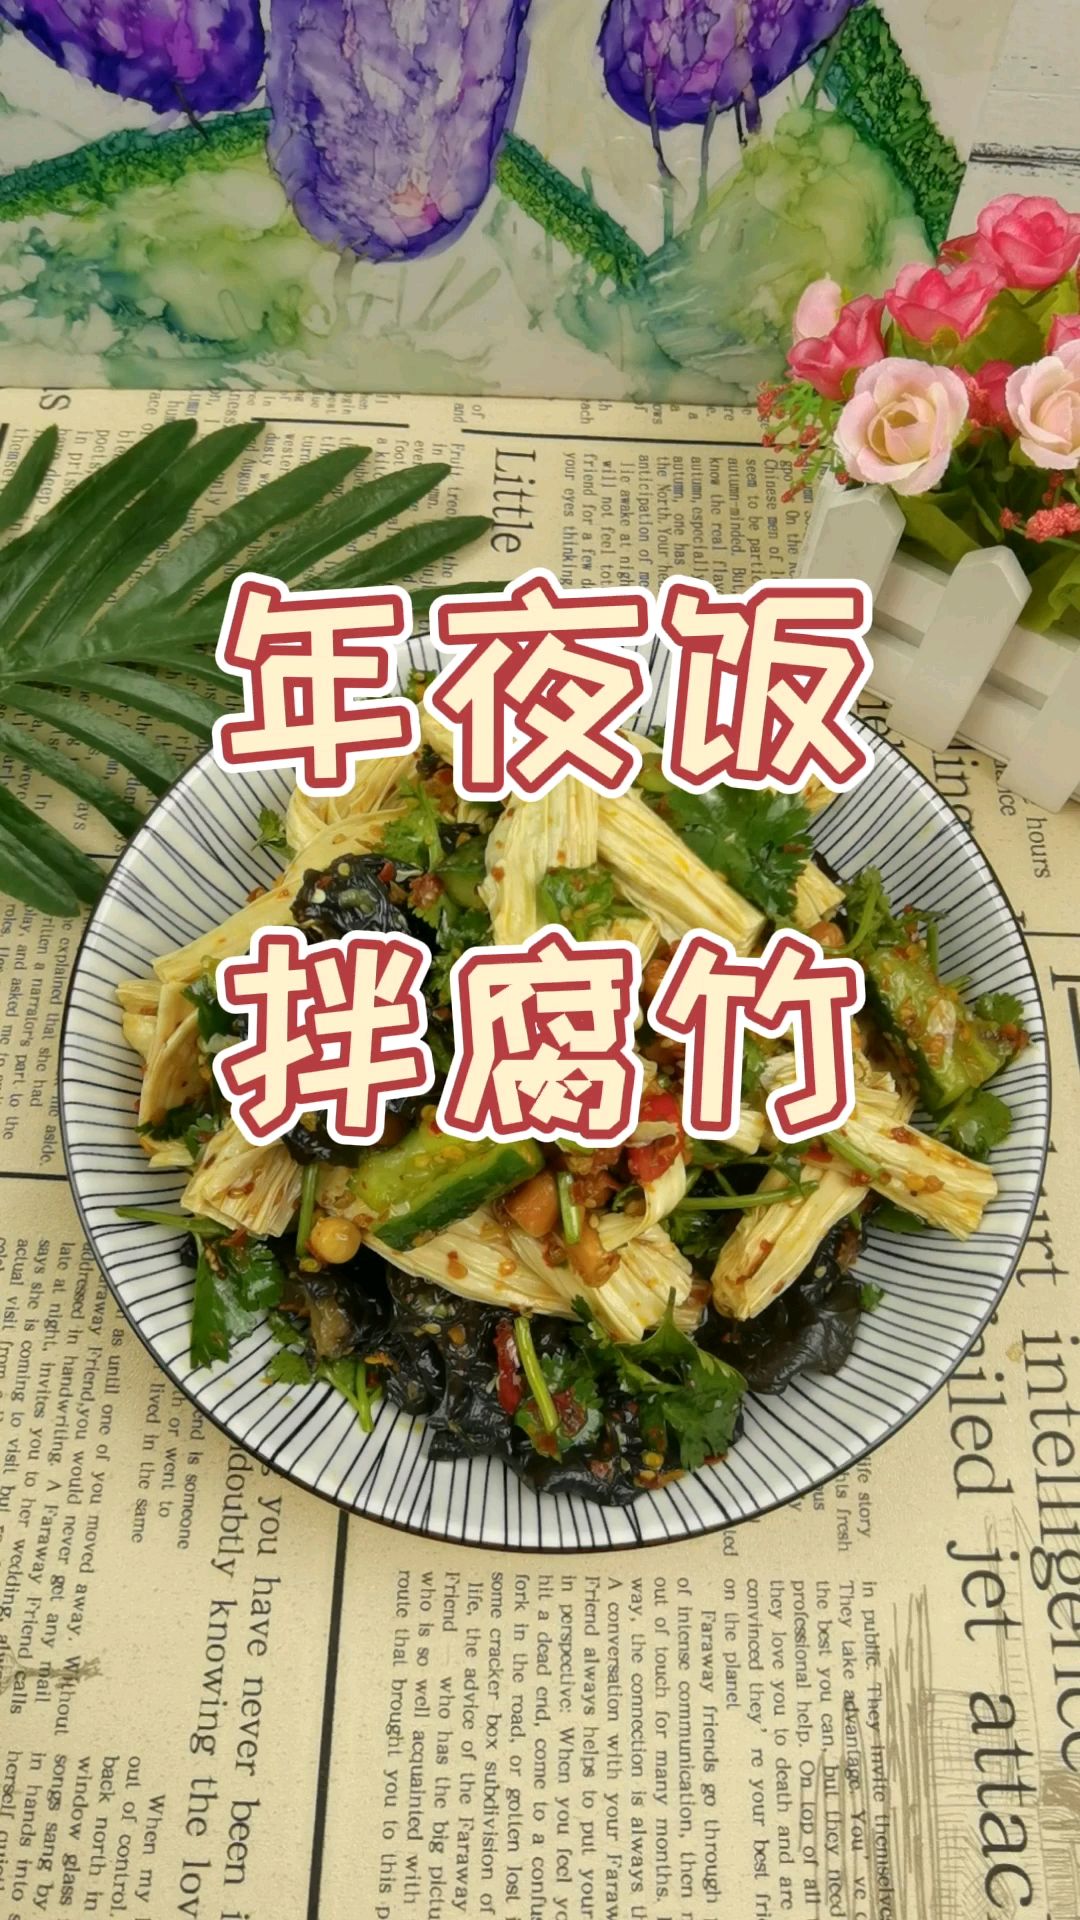 New Year’s Eve Dinner is Also Served with Cold Dishes-mixed with Yuba, New Year Banquet Guests Eat Rot